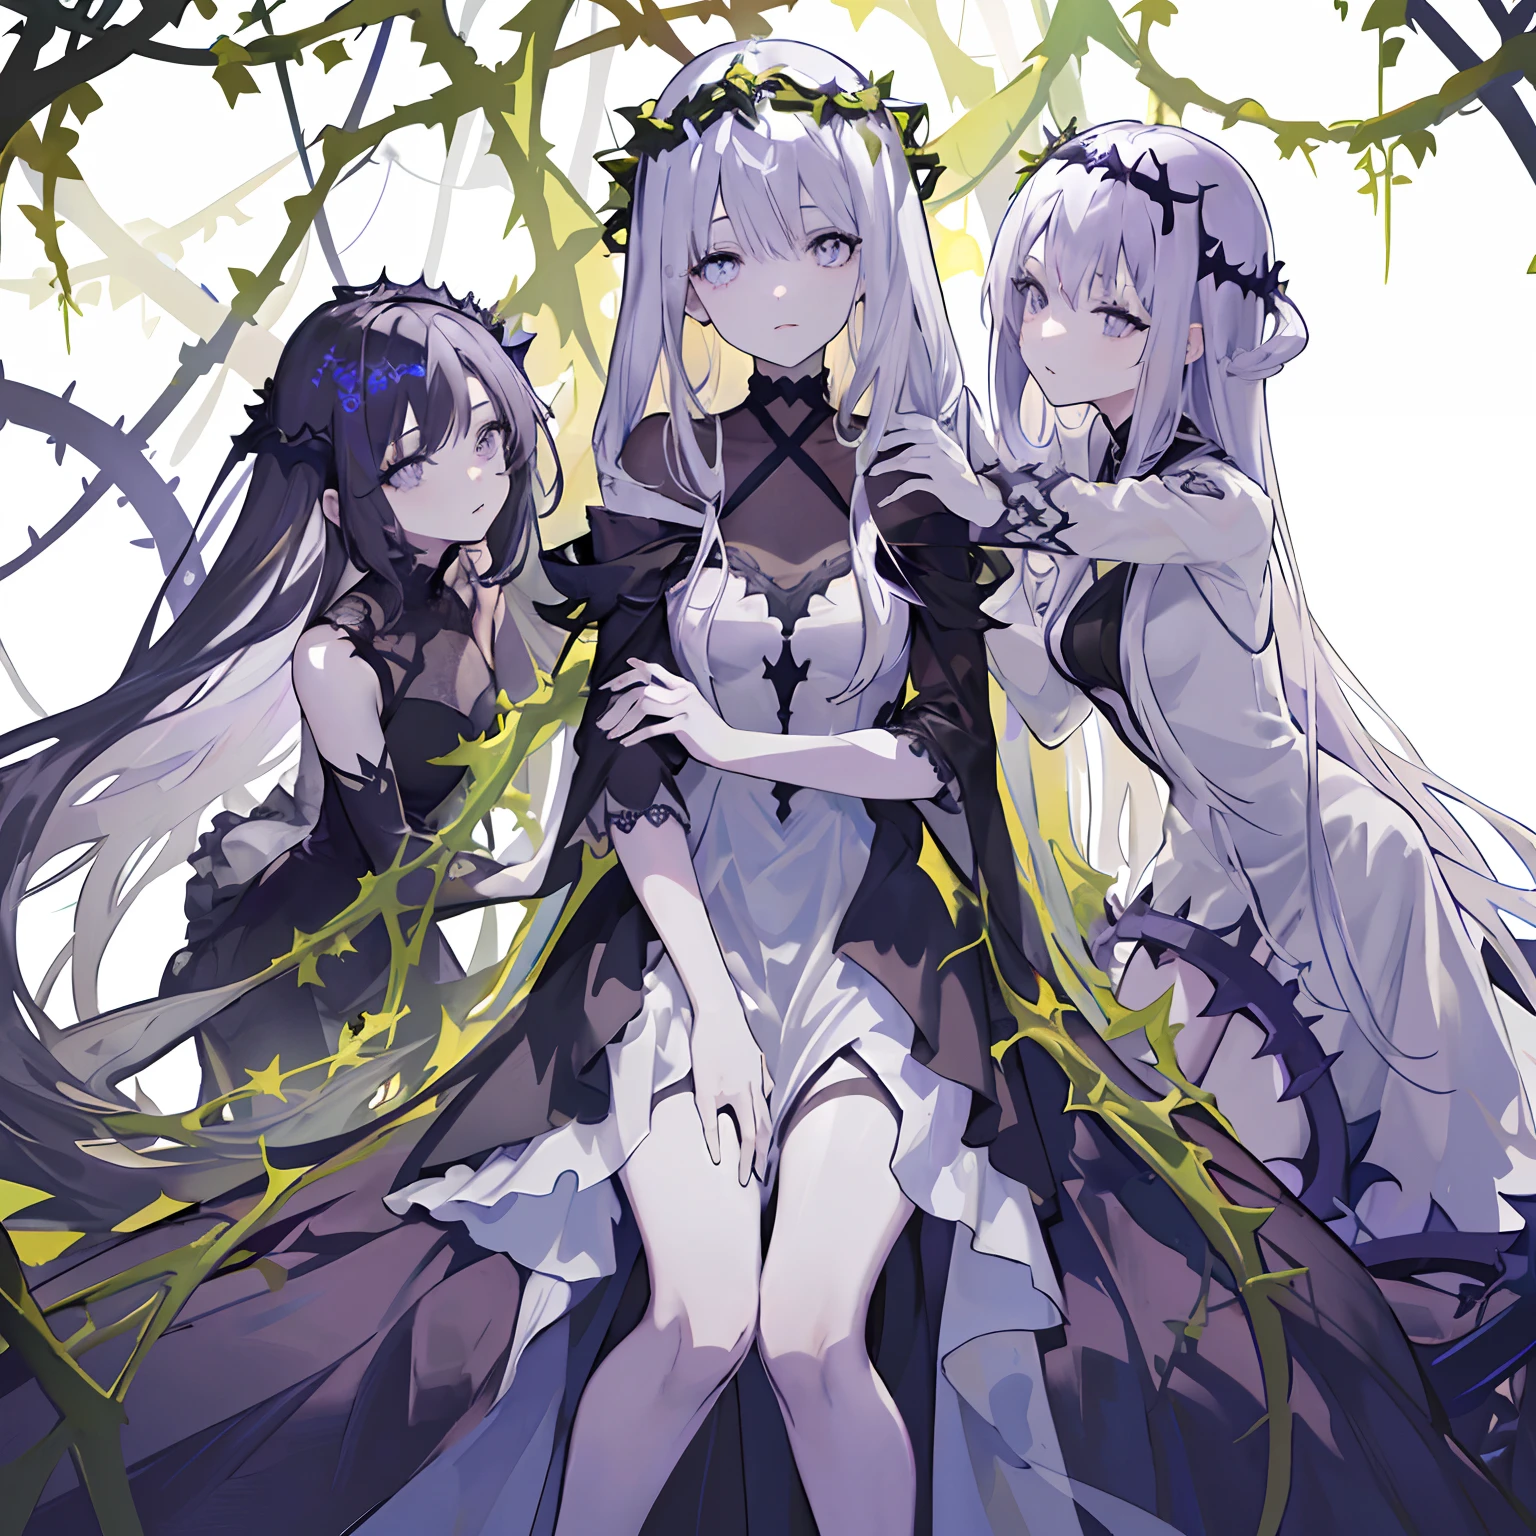 ((masterpiece:1.4, best quality))+, (ultra detailed)+,(ultra detailed eyes)+,
(cute 1girl),15 years old,(violet eyes:1.15),silver hair, very long hair,(wariza:1.2),pale skin,closed mouth,sad,
(She is dressed in a gown made of intertwining vines:1.5),(flat chest:1.2),(vines dress:1.4),(dress made of vines:1.2),(surrounded by vines:1.4),
(despair:1.3),gothic,
(dark yellow vines:1.3),leaves,(vines tree:1.1),
(dawn light:1.2),violet,
(heavy Monochrome:1.16),(depth of field:1.4),